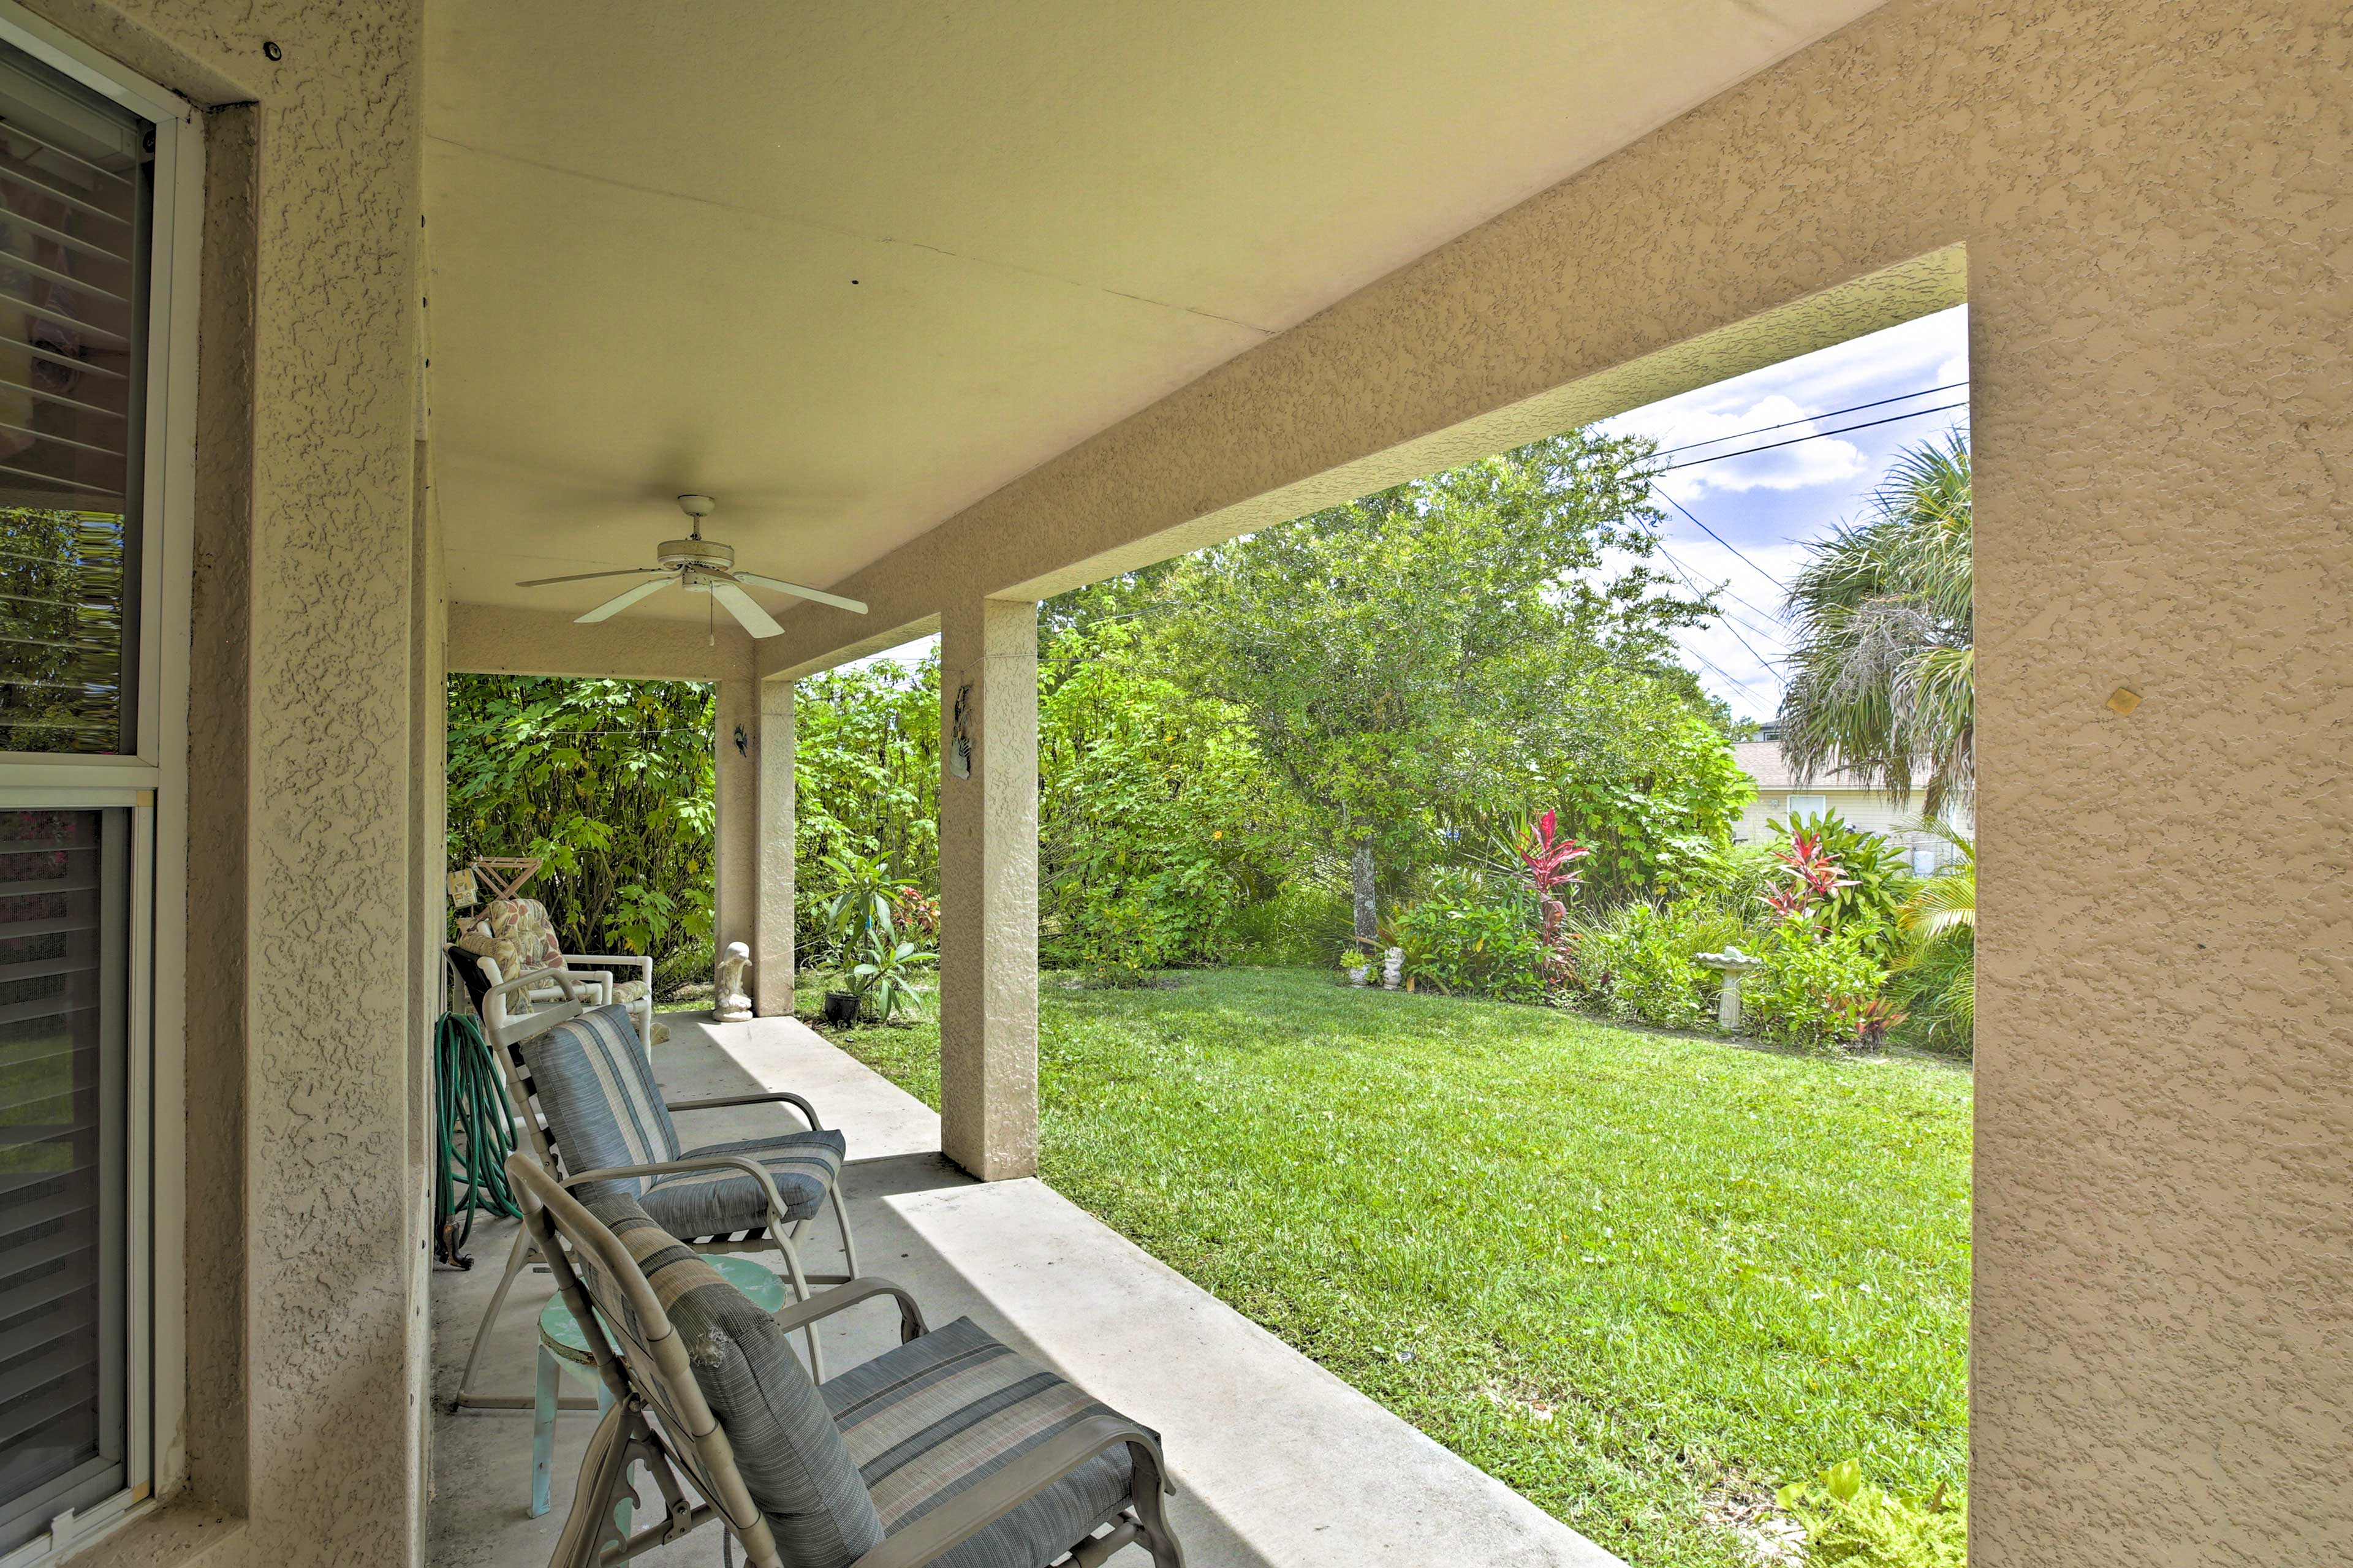 Soak up the lush views from the comfort of the shaded patio.